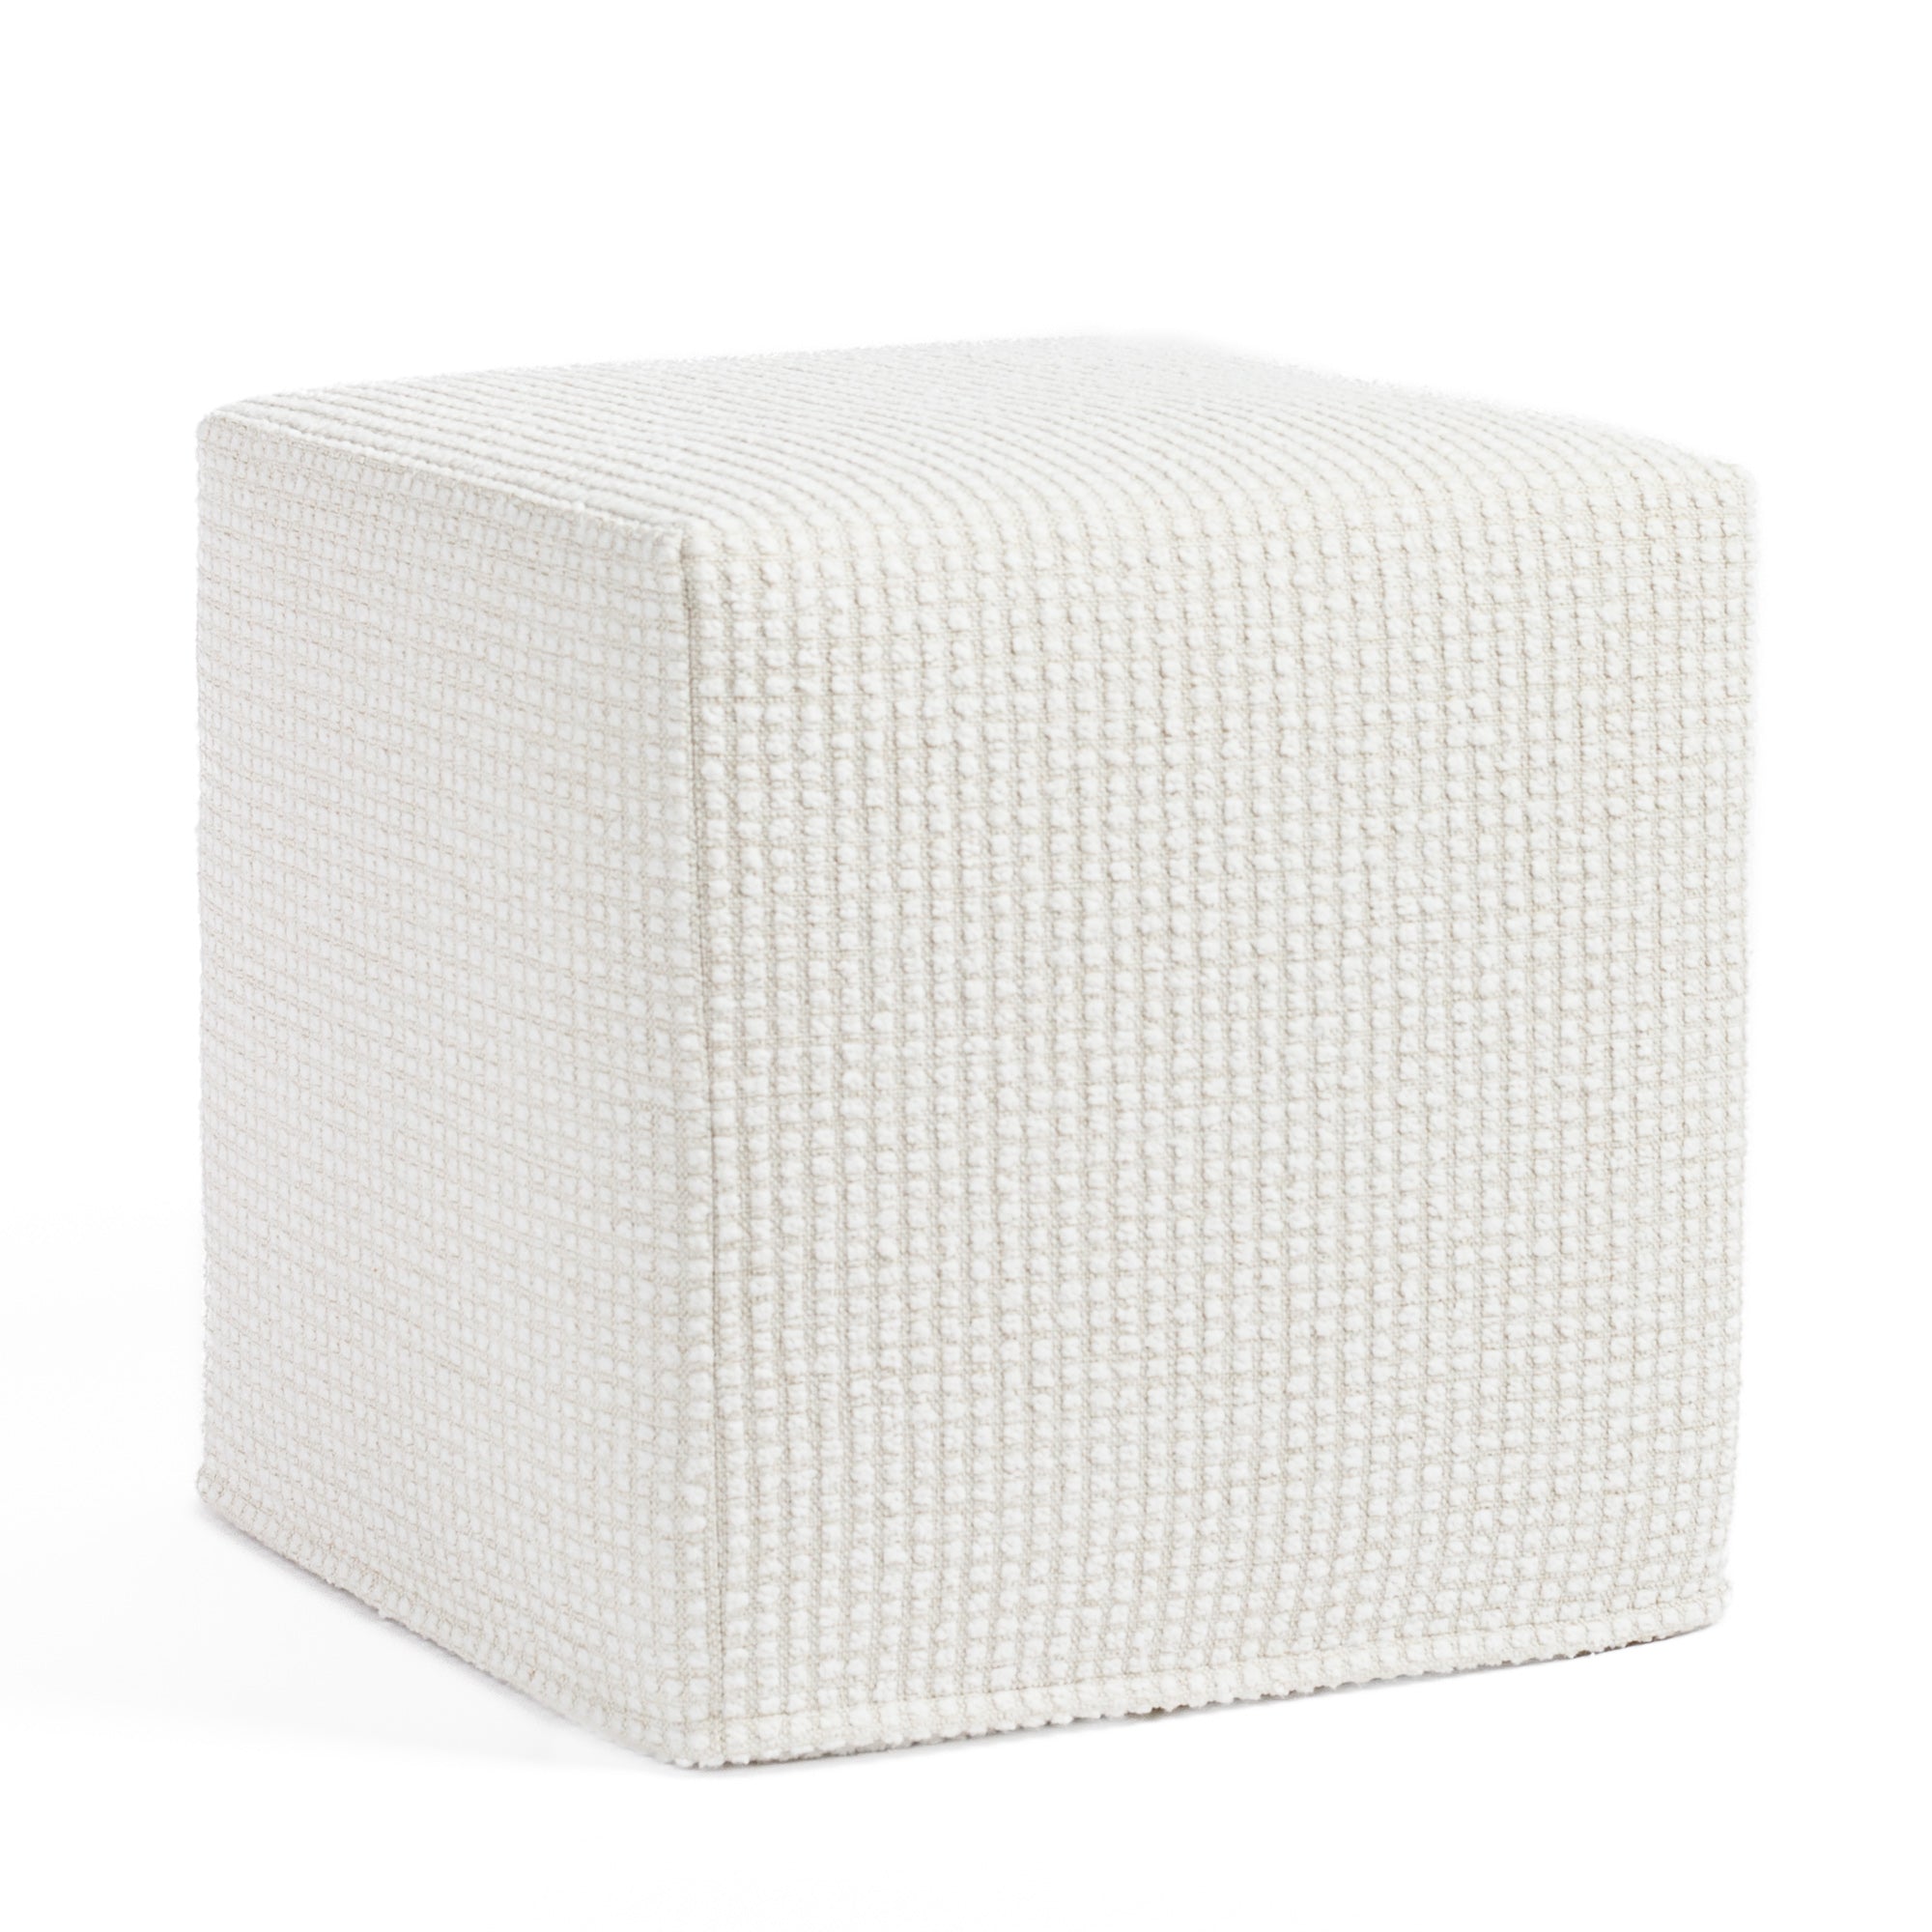 Carter 16x16 Ottoman Pearl, a cream textured grid patterned high performance fabric cube ottoman from Tonic Living 